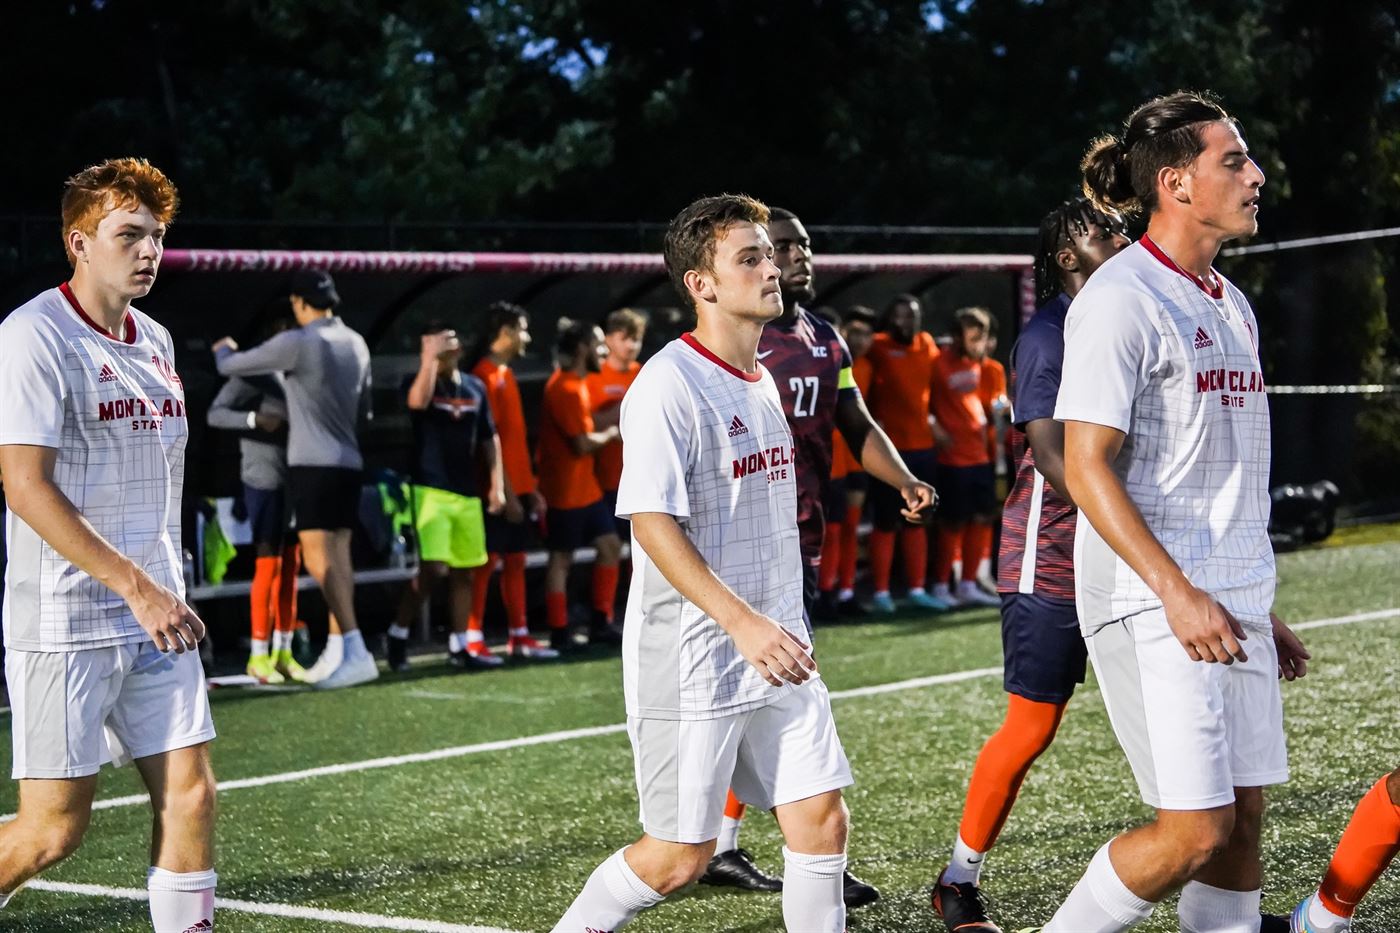 Left to right: Owen Murphy, Ian Chesney and Amer Lukovic are all freshman who have contributed to Montclair State's early success this season. Photo courtesy of David Venezia